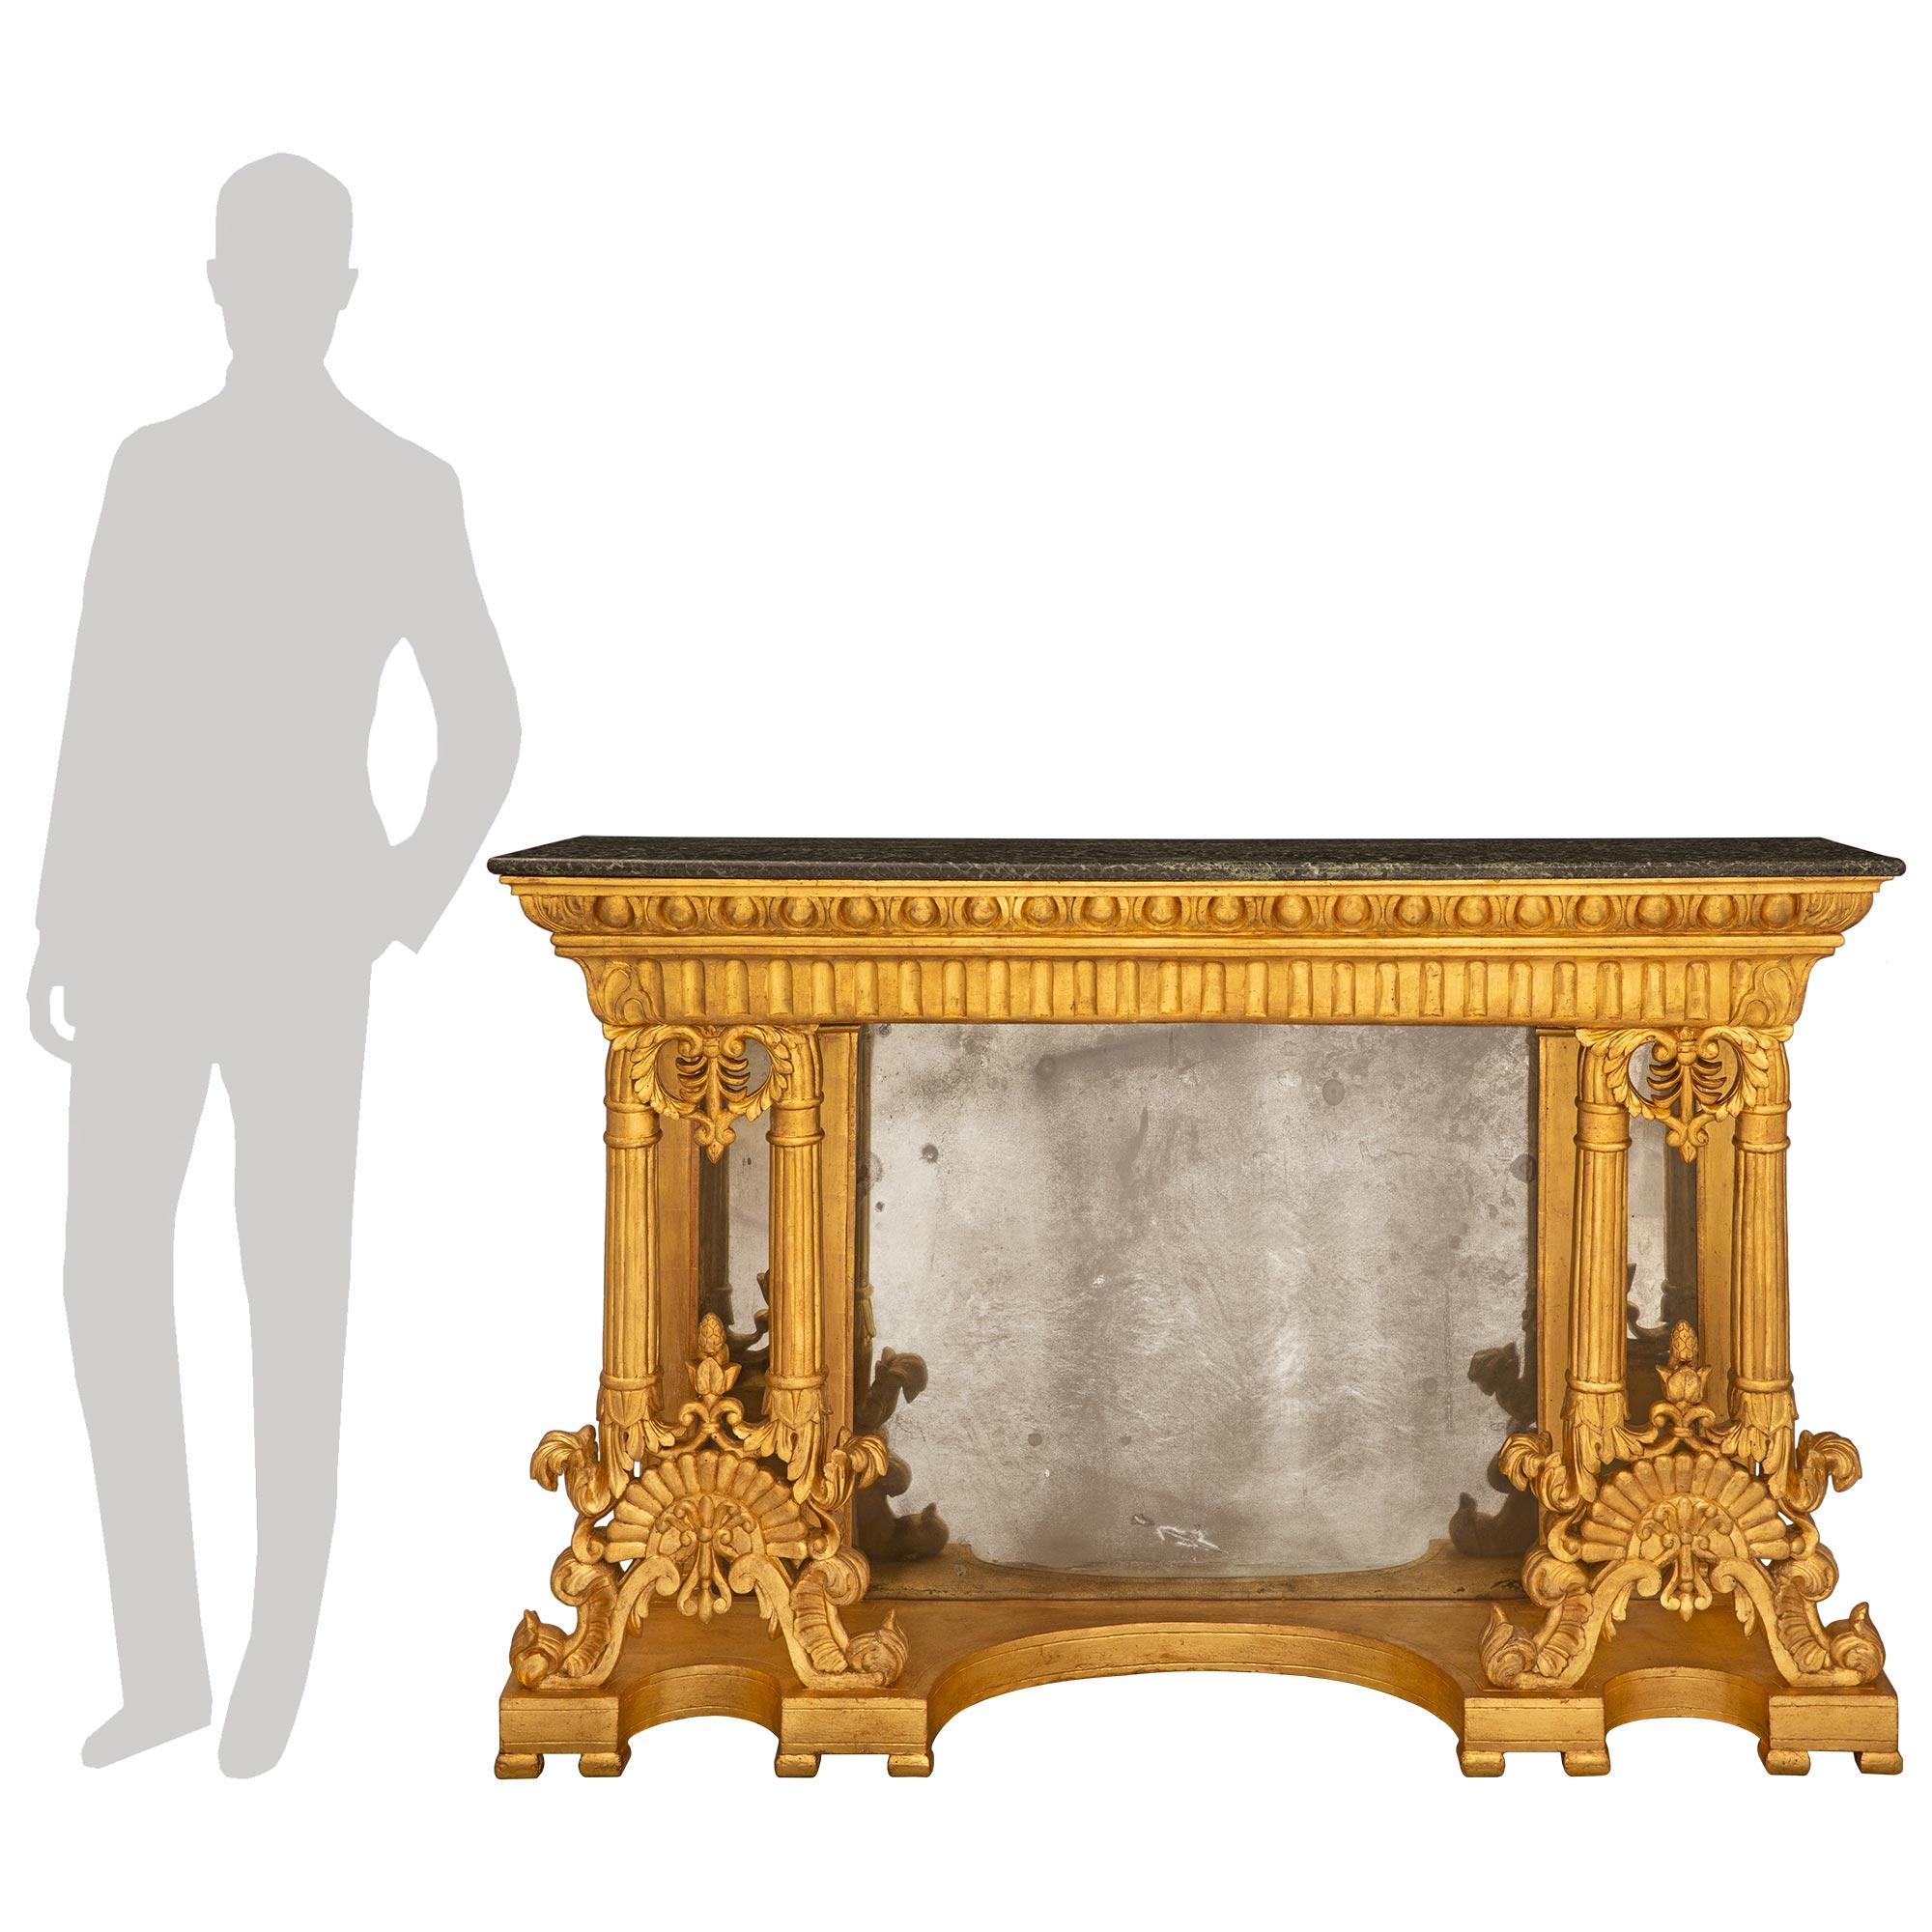 An impressive pair of Italian 19th century Neo-Classical st. giltwood and Rosso Levanto marble mirrored consoles. Each console is raised by fine topie feet below the decorative bottom tier with beautiful curved designs and delicate fillets with